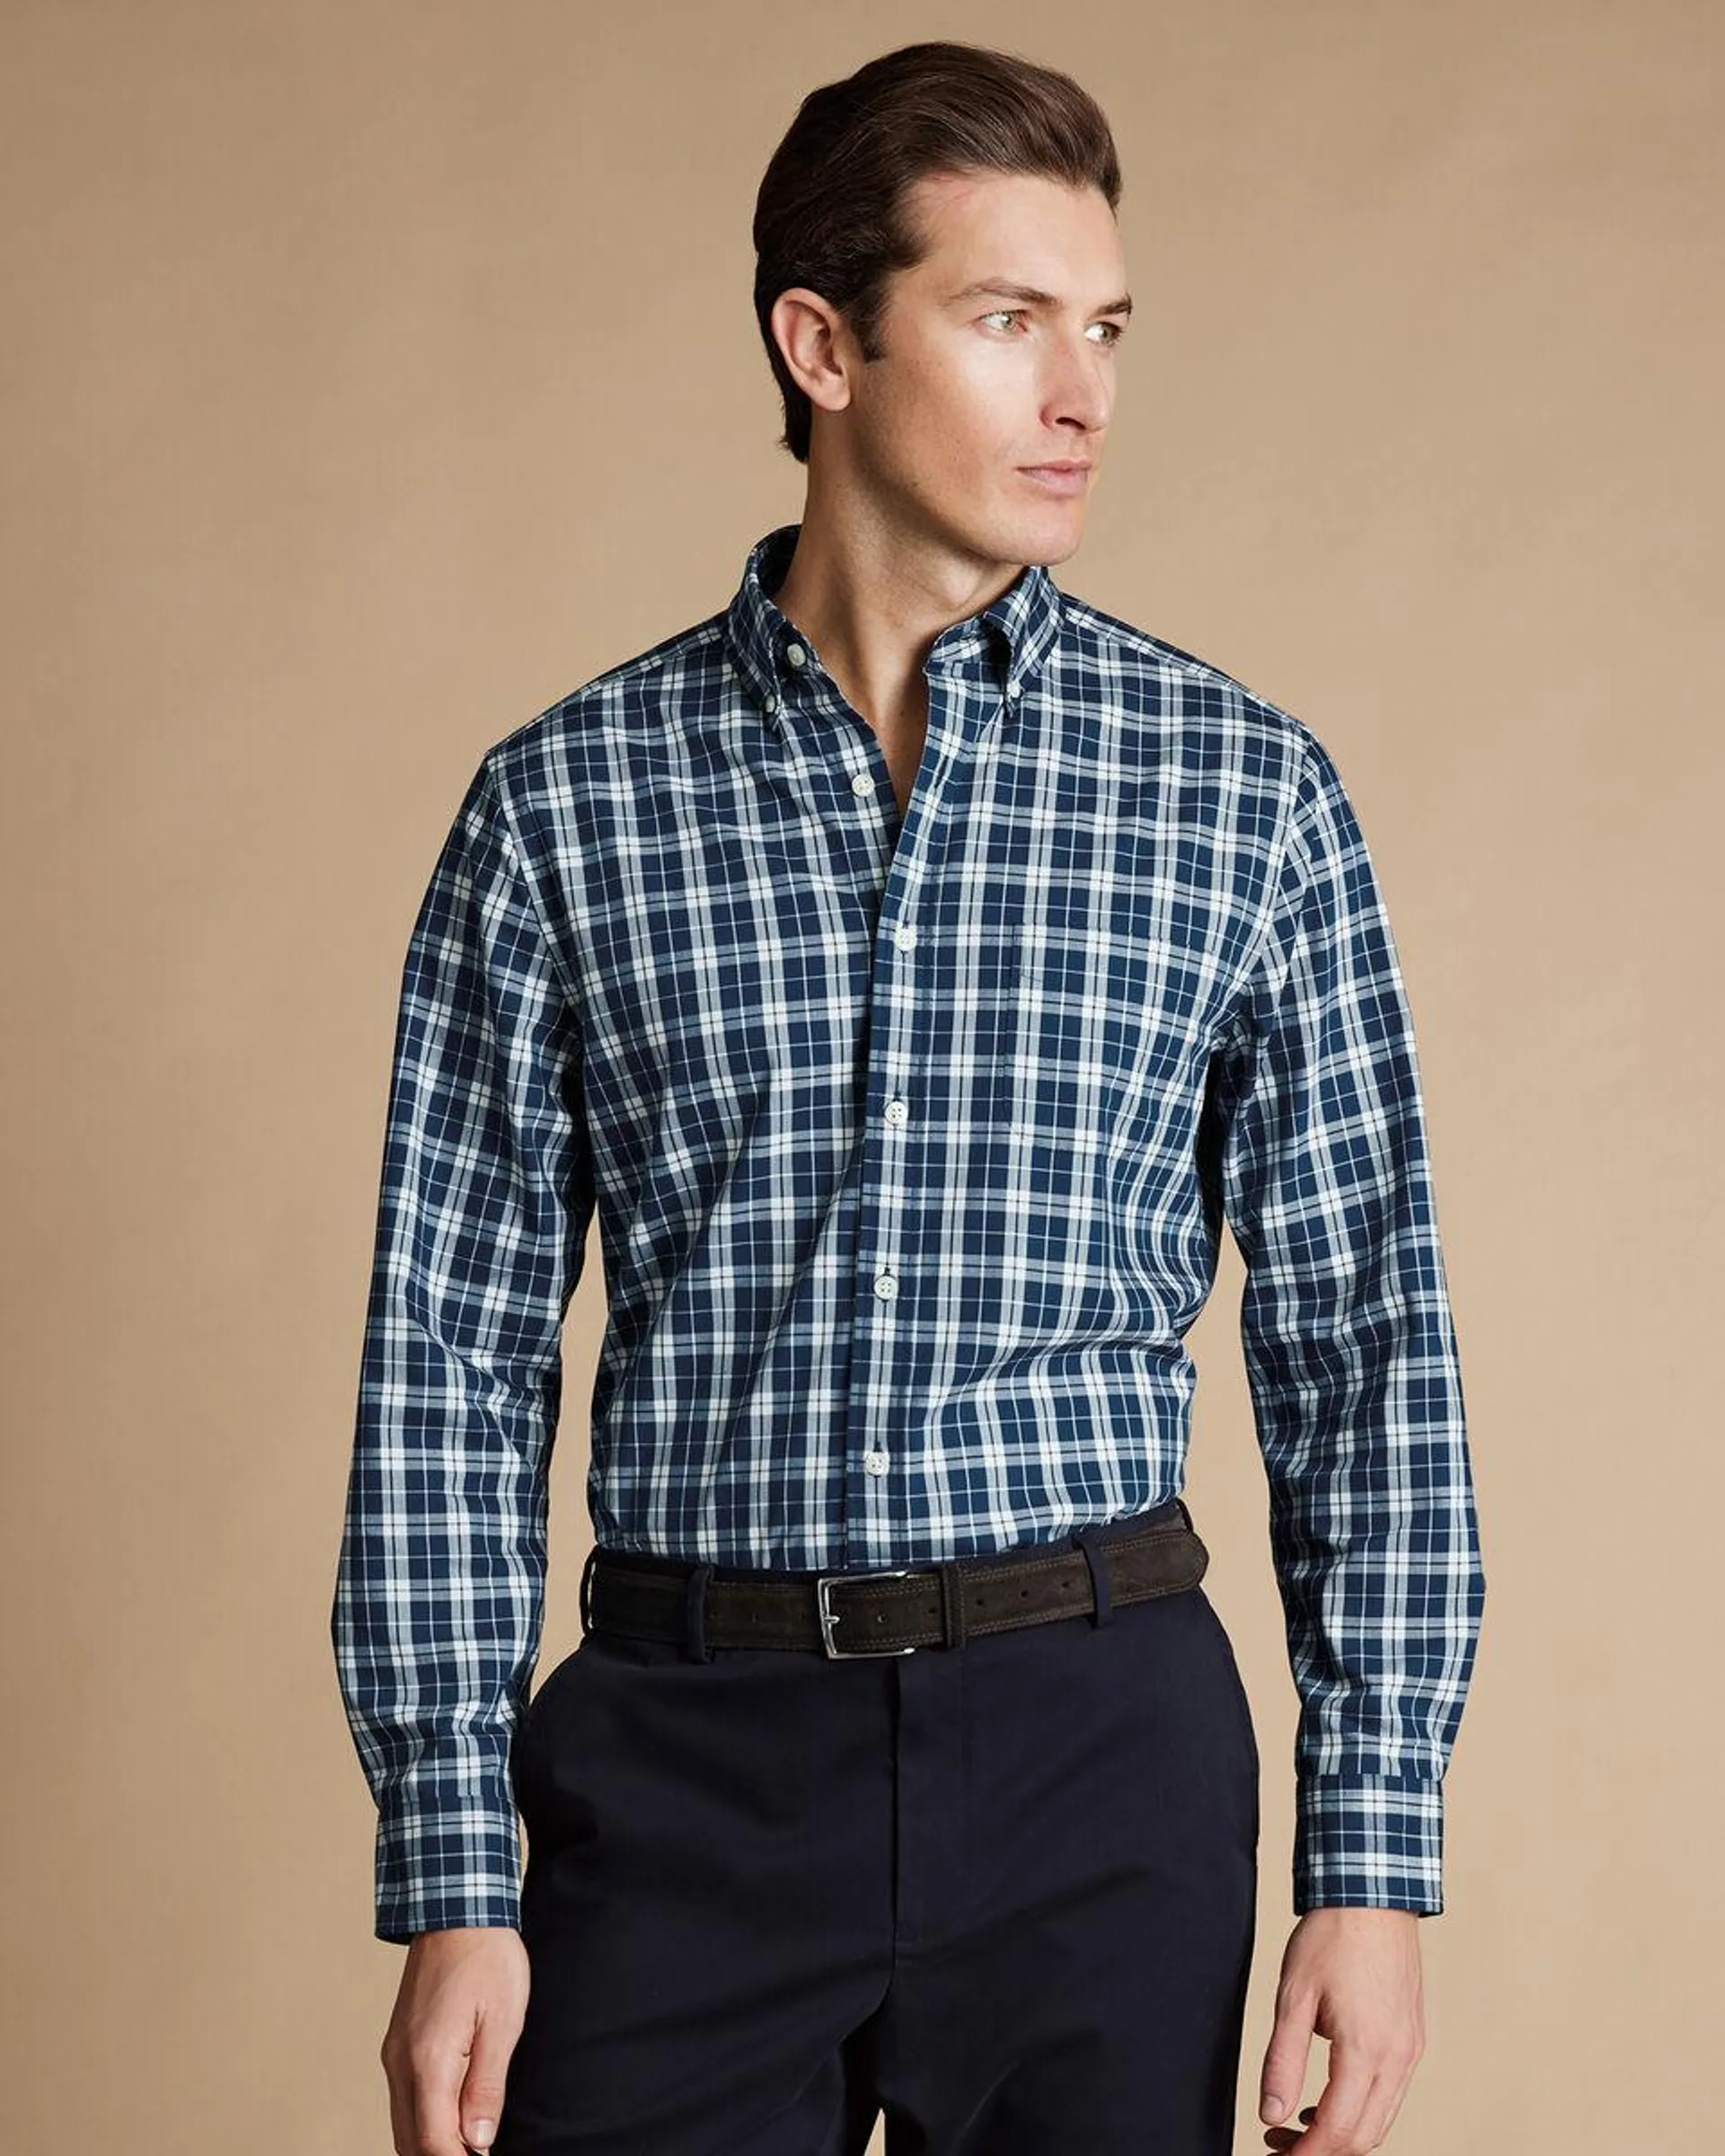 details about product: Button-Down Collar Non-Iron Stretch Poplin Check Shirt - Blue